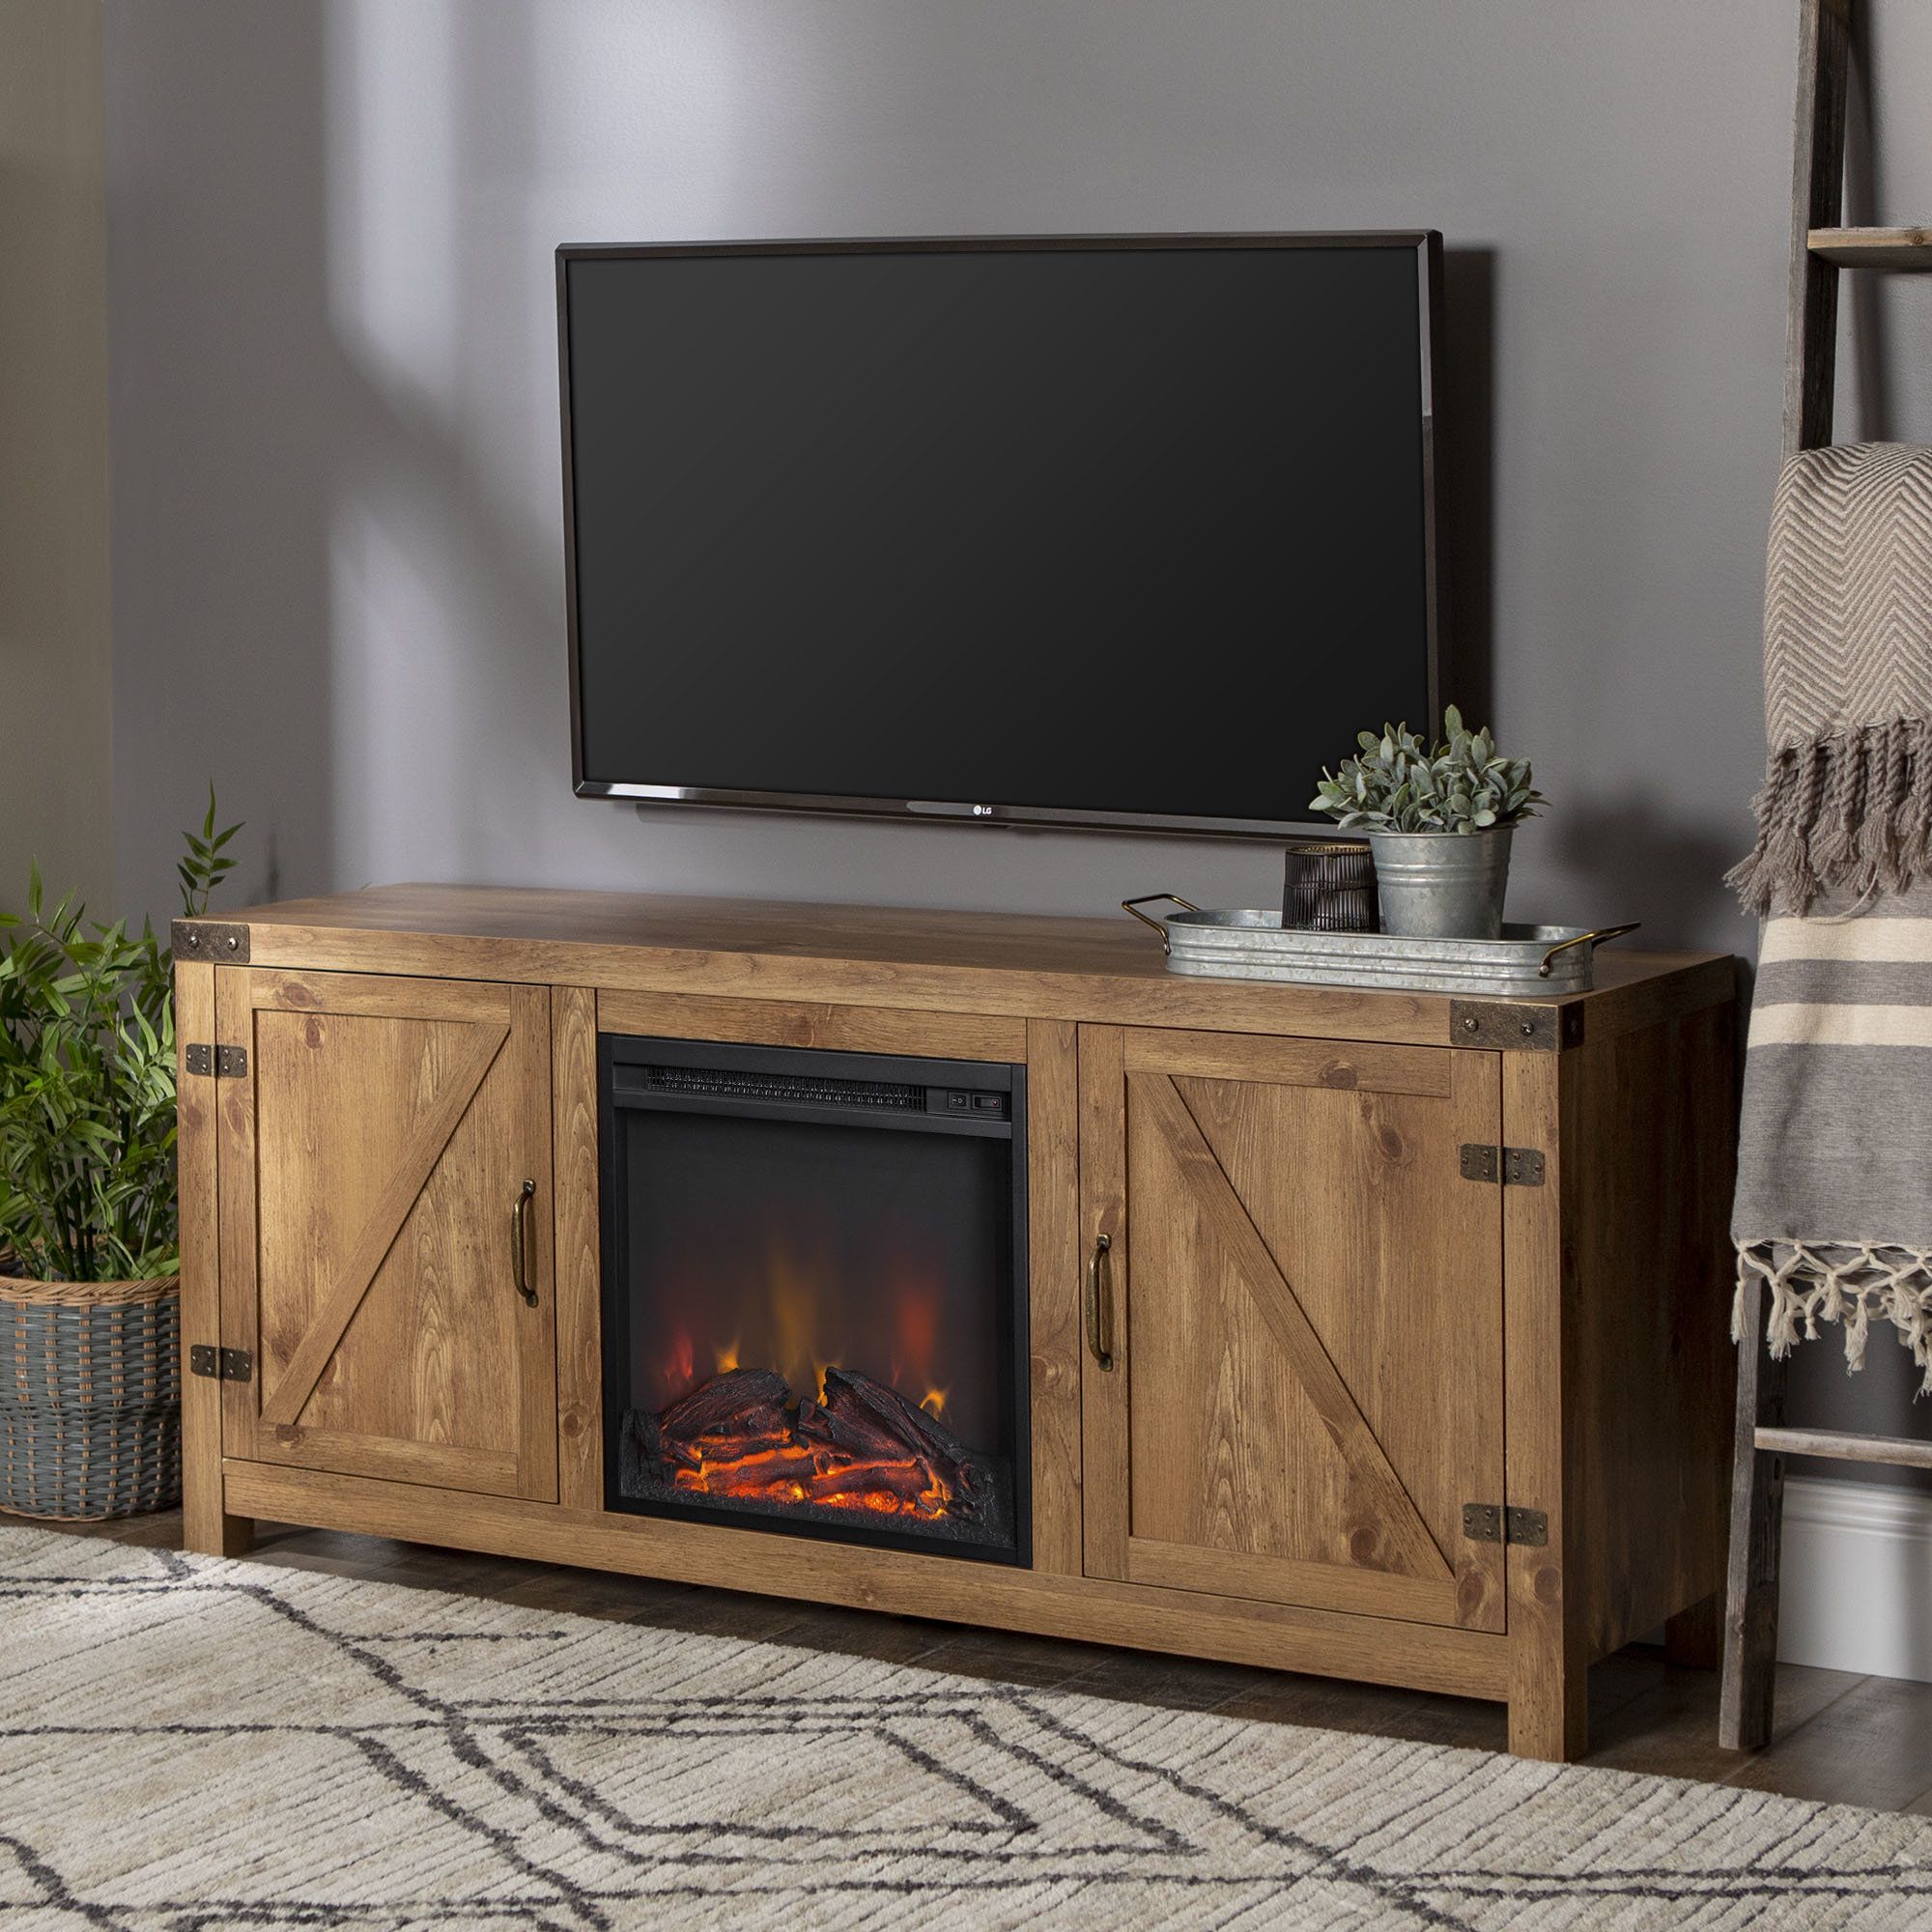 Fireplace Tv Stands & Entertainment Centers You'll Love | Wayfair (View 28 of 30)